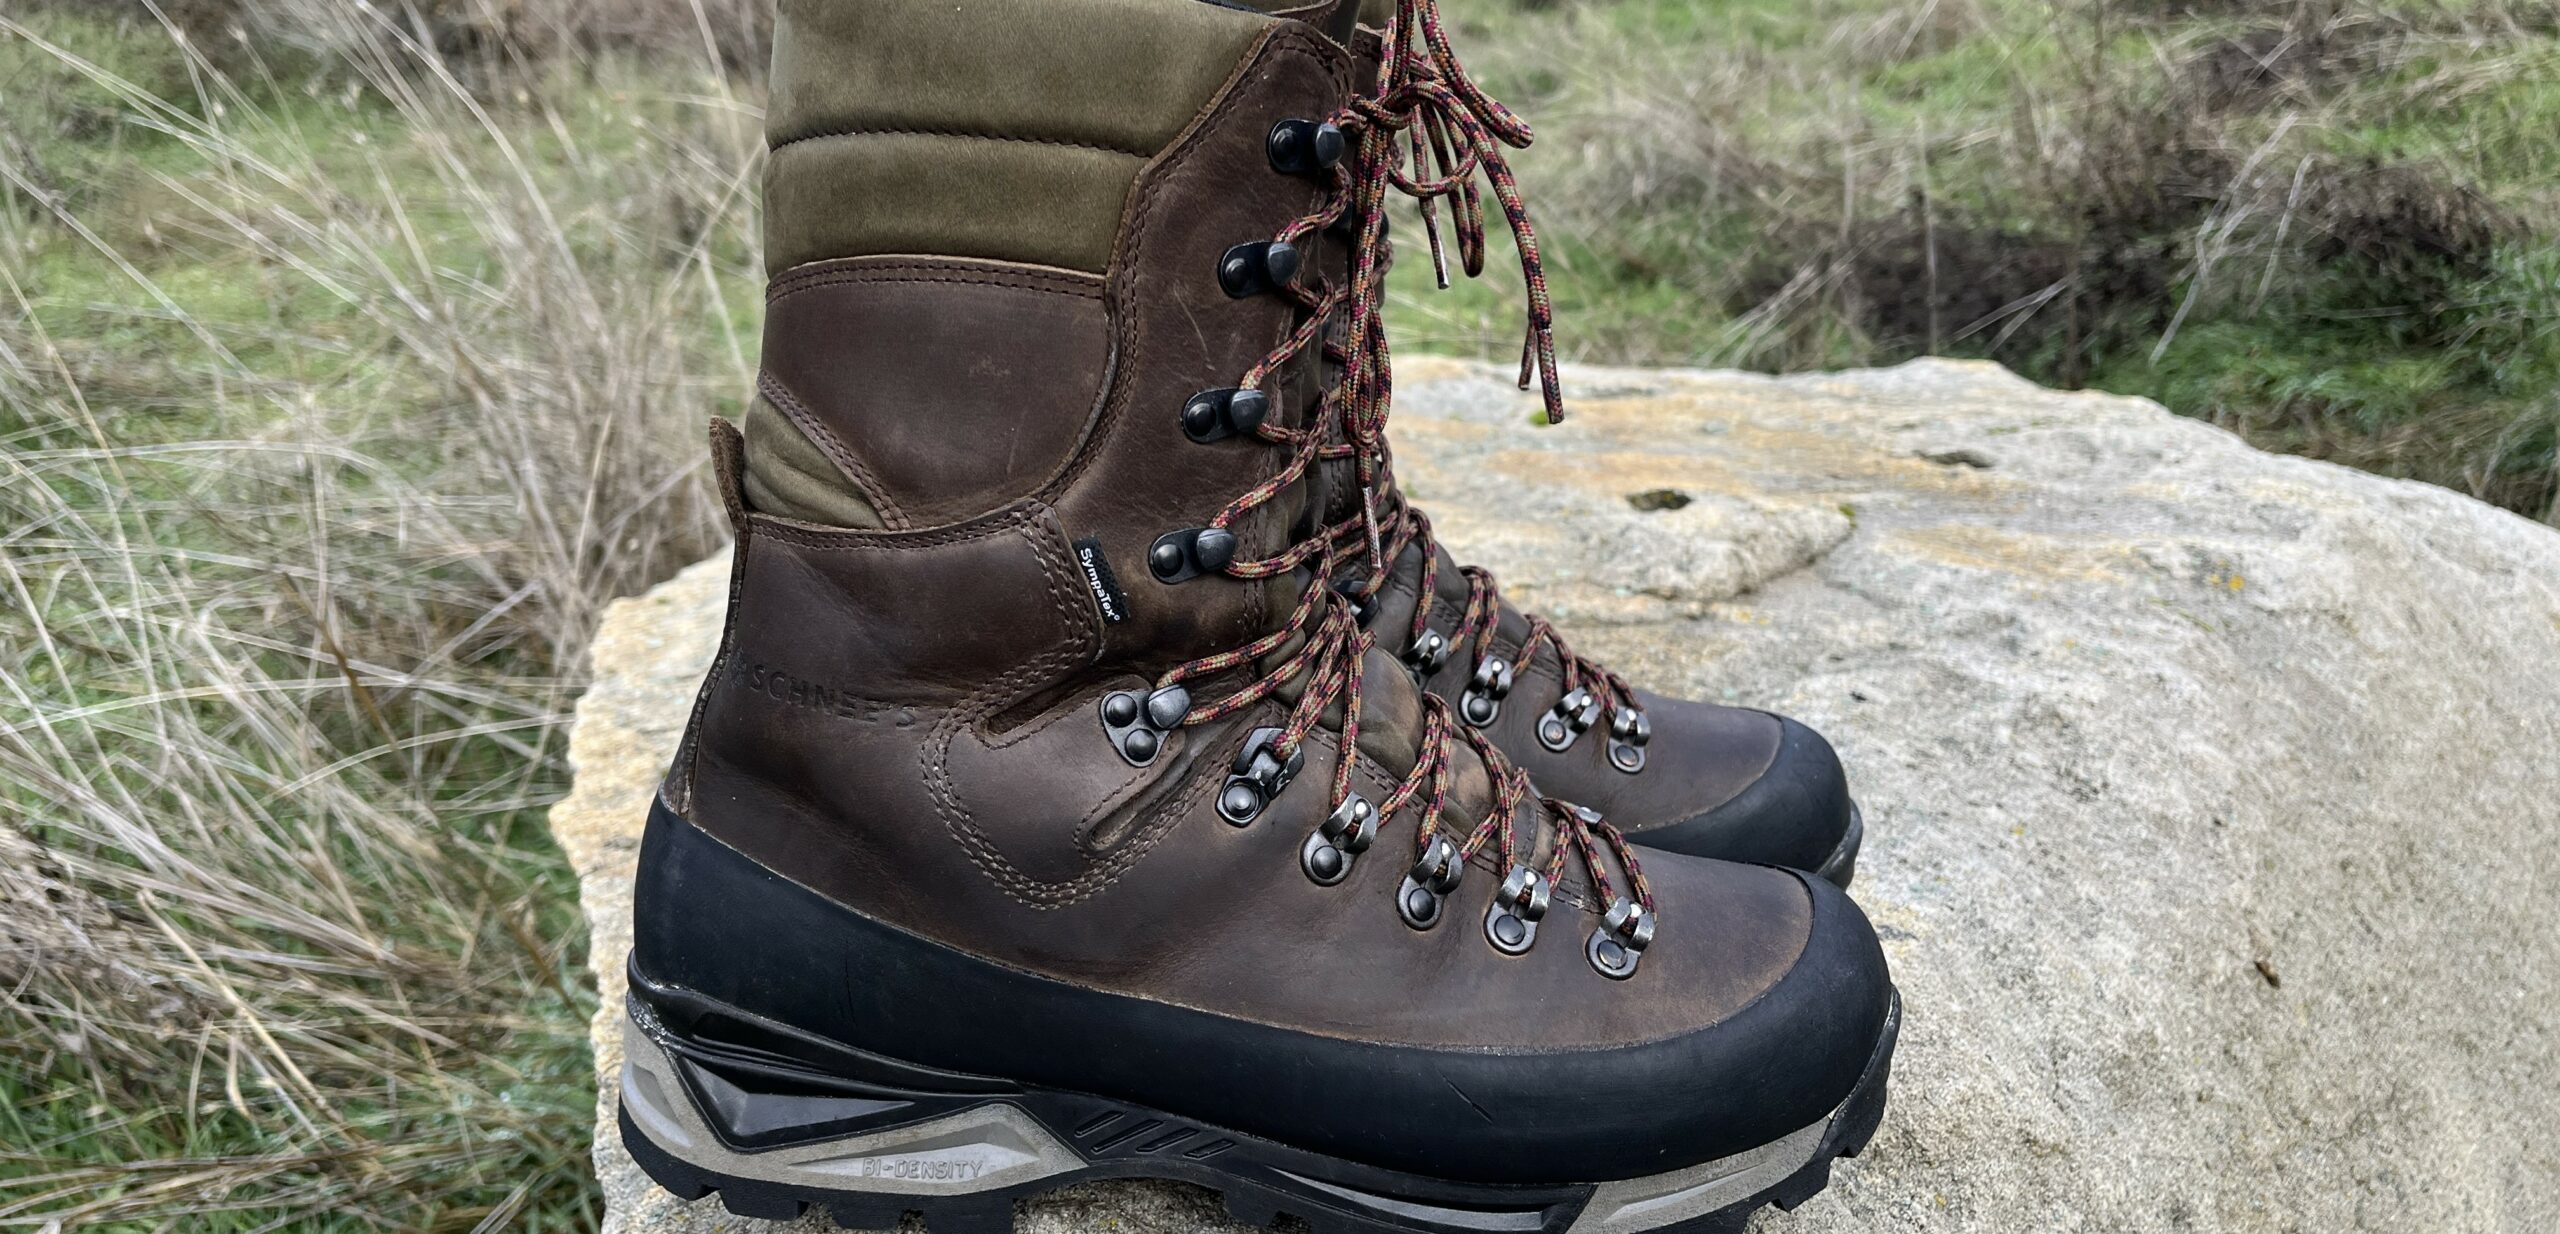 Schnee Granite boots review. Schnee boots review